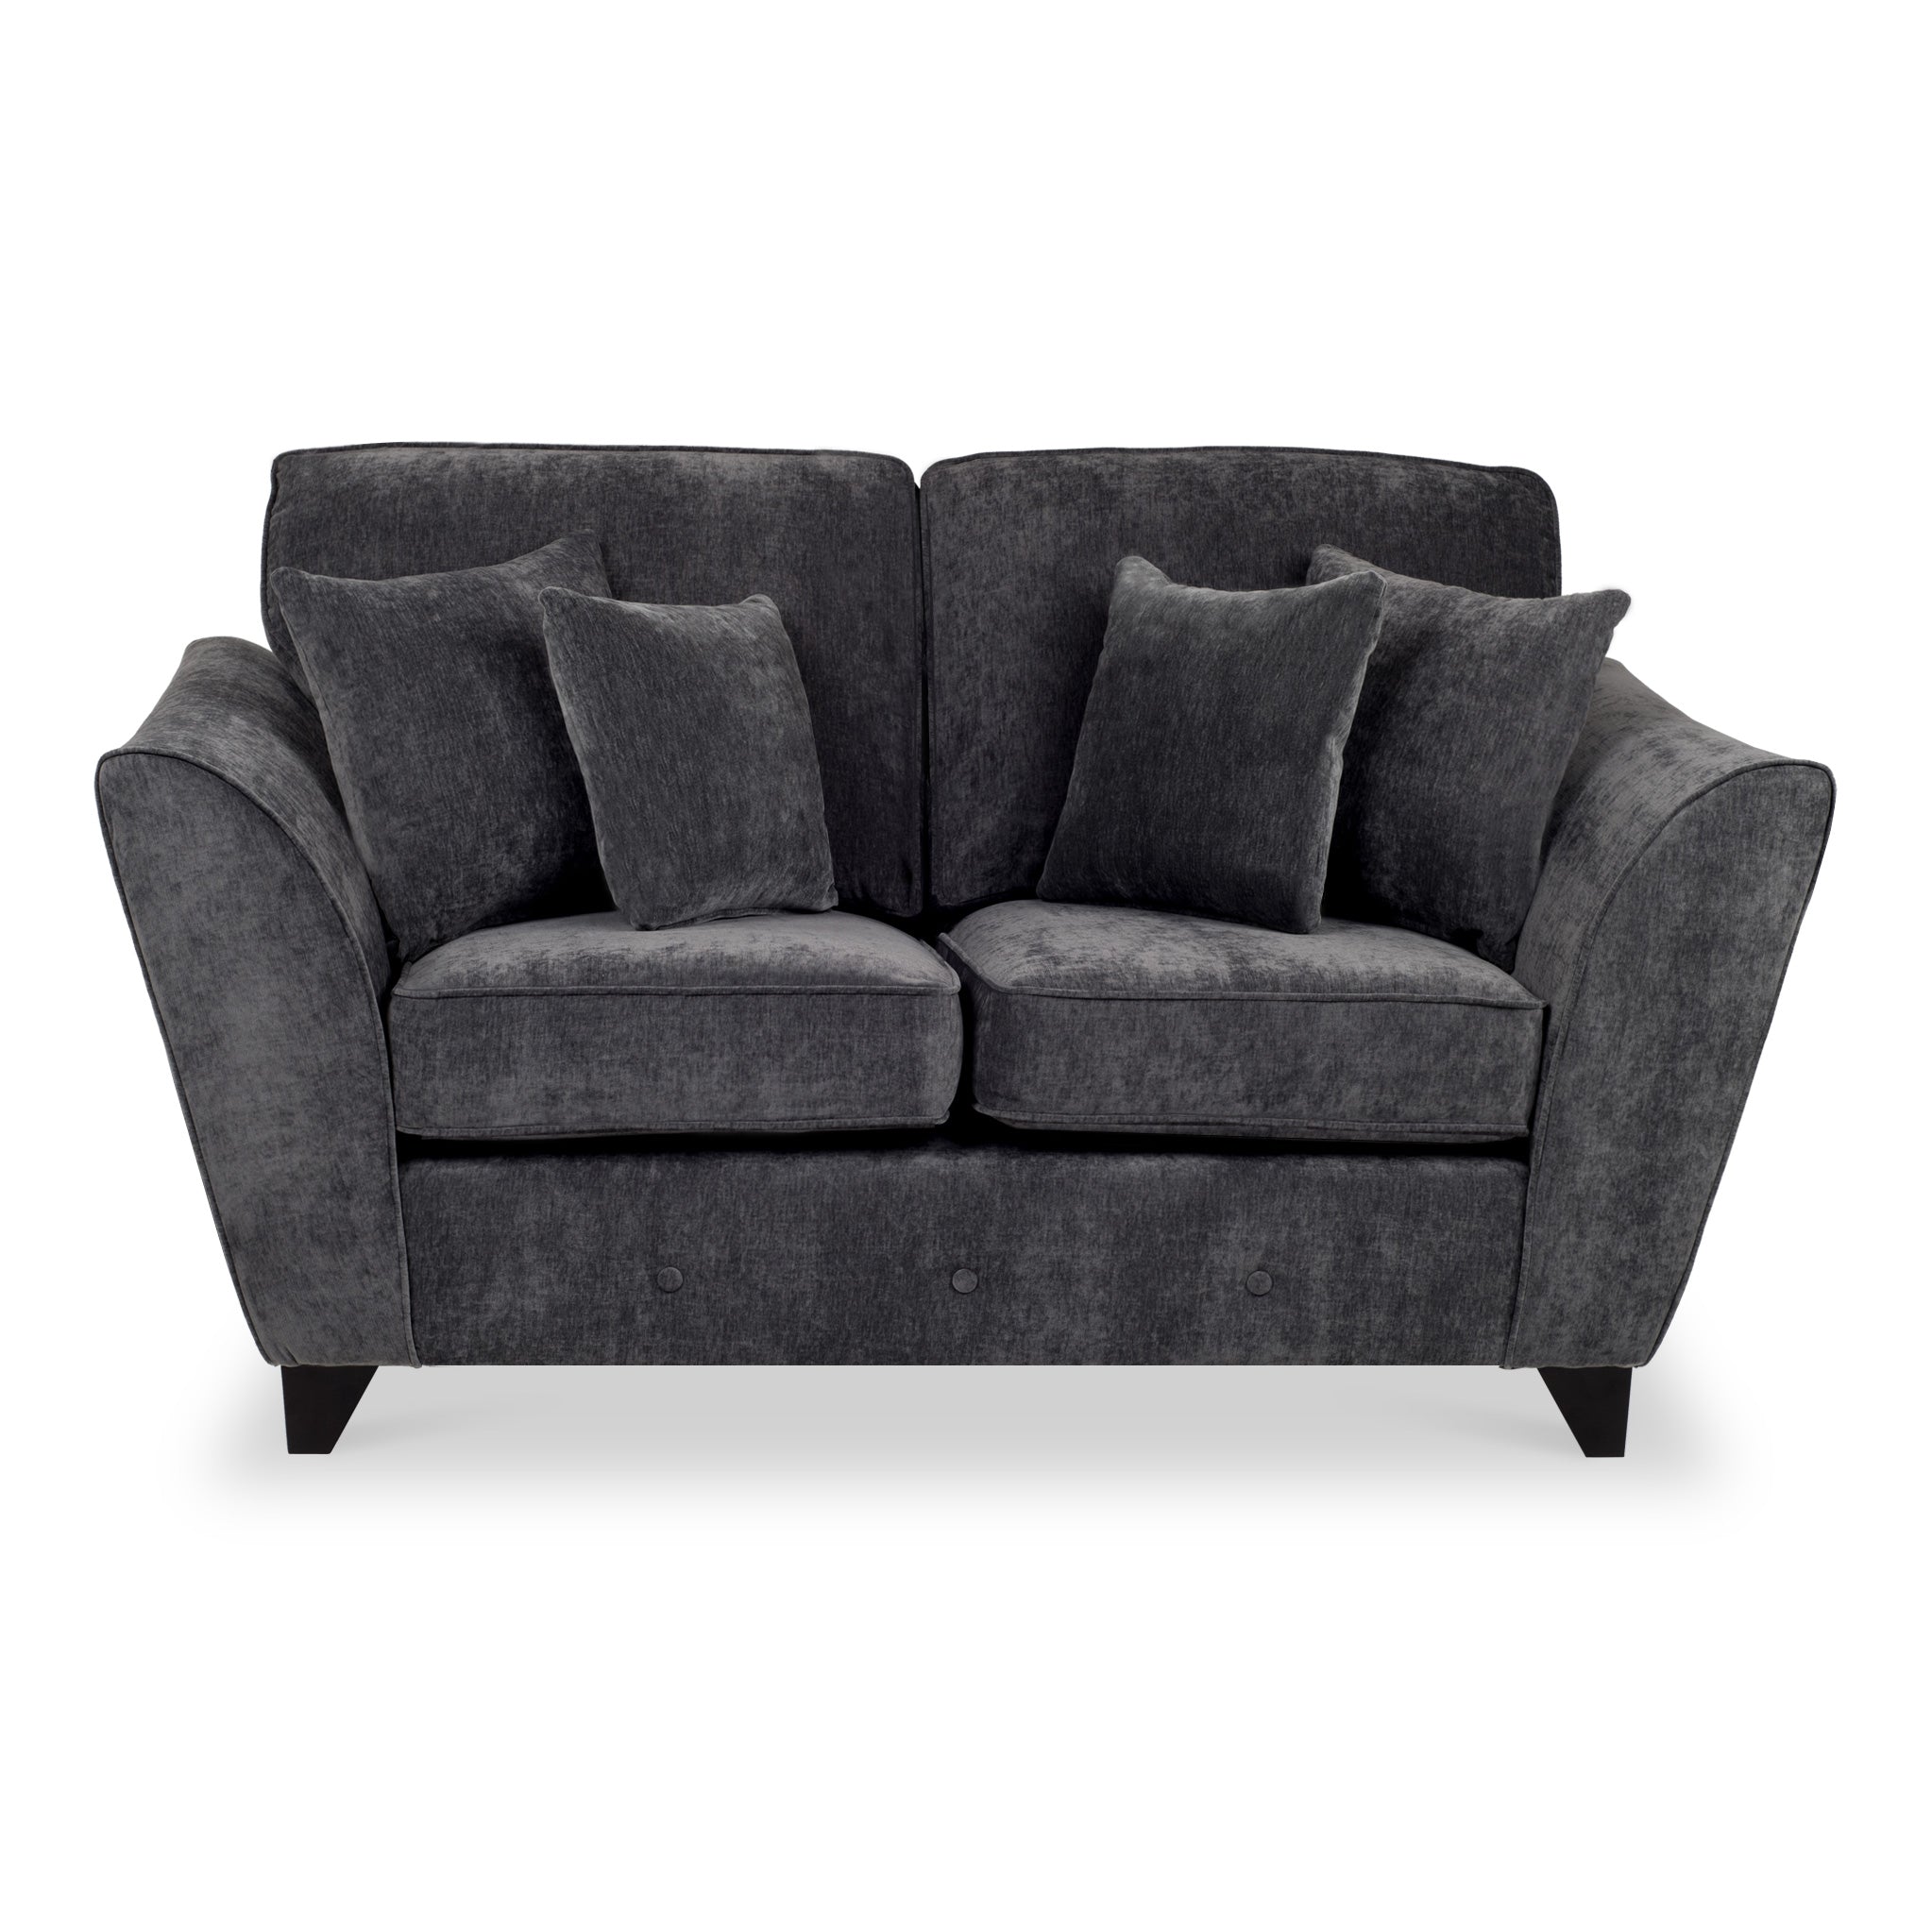 Harris 2 Seater Sofa Grey Green Blue Fabric Couch Roseland